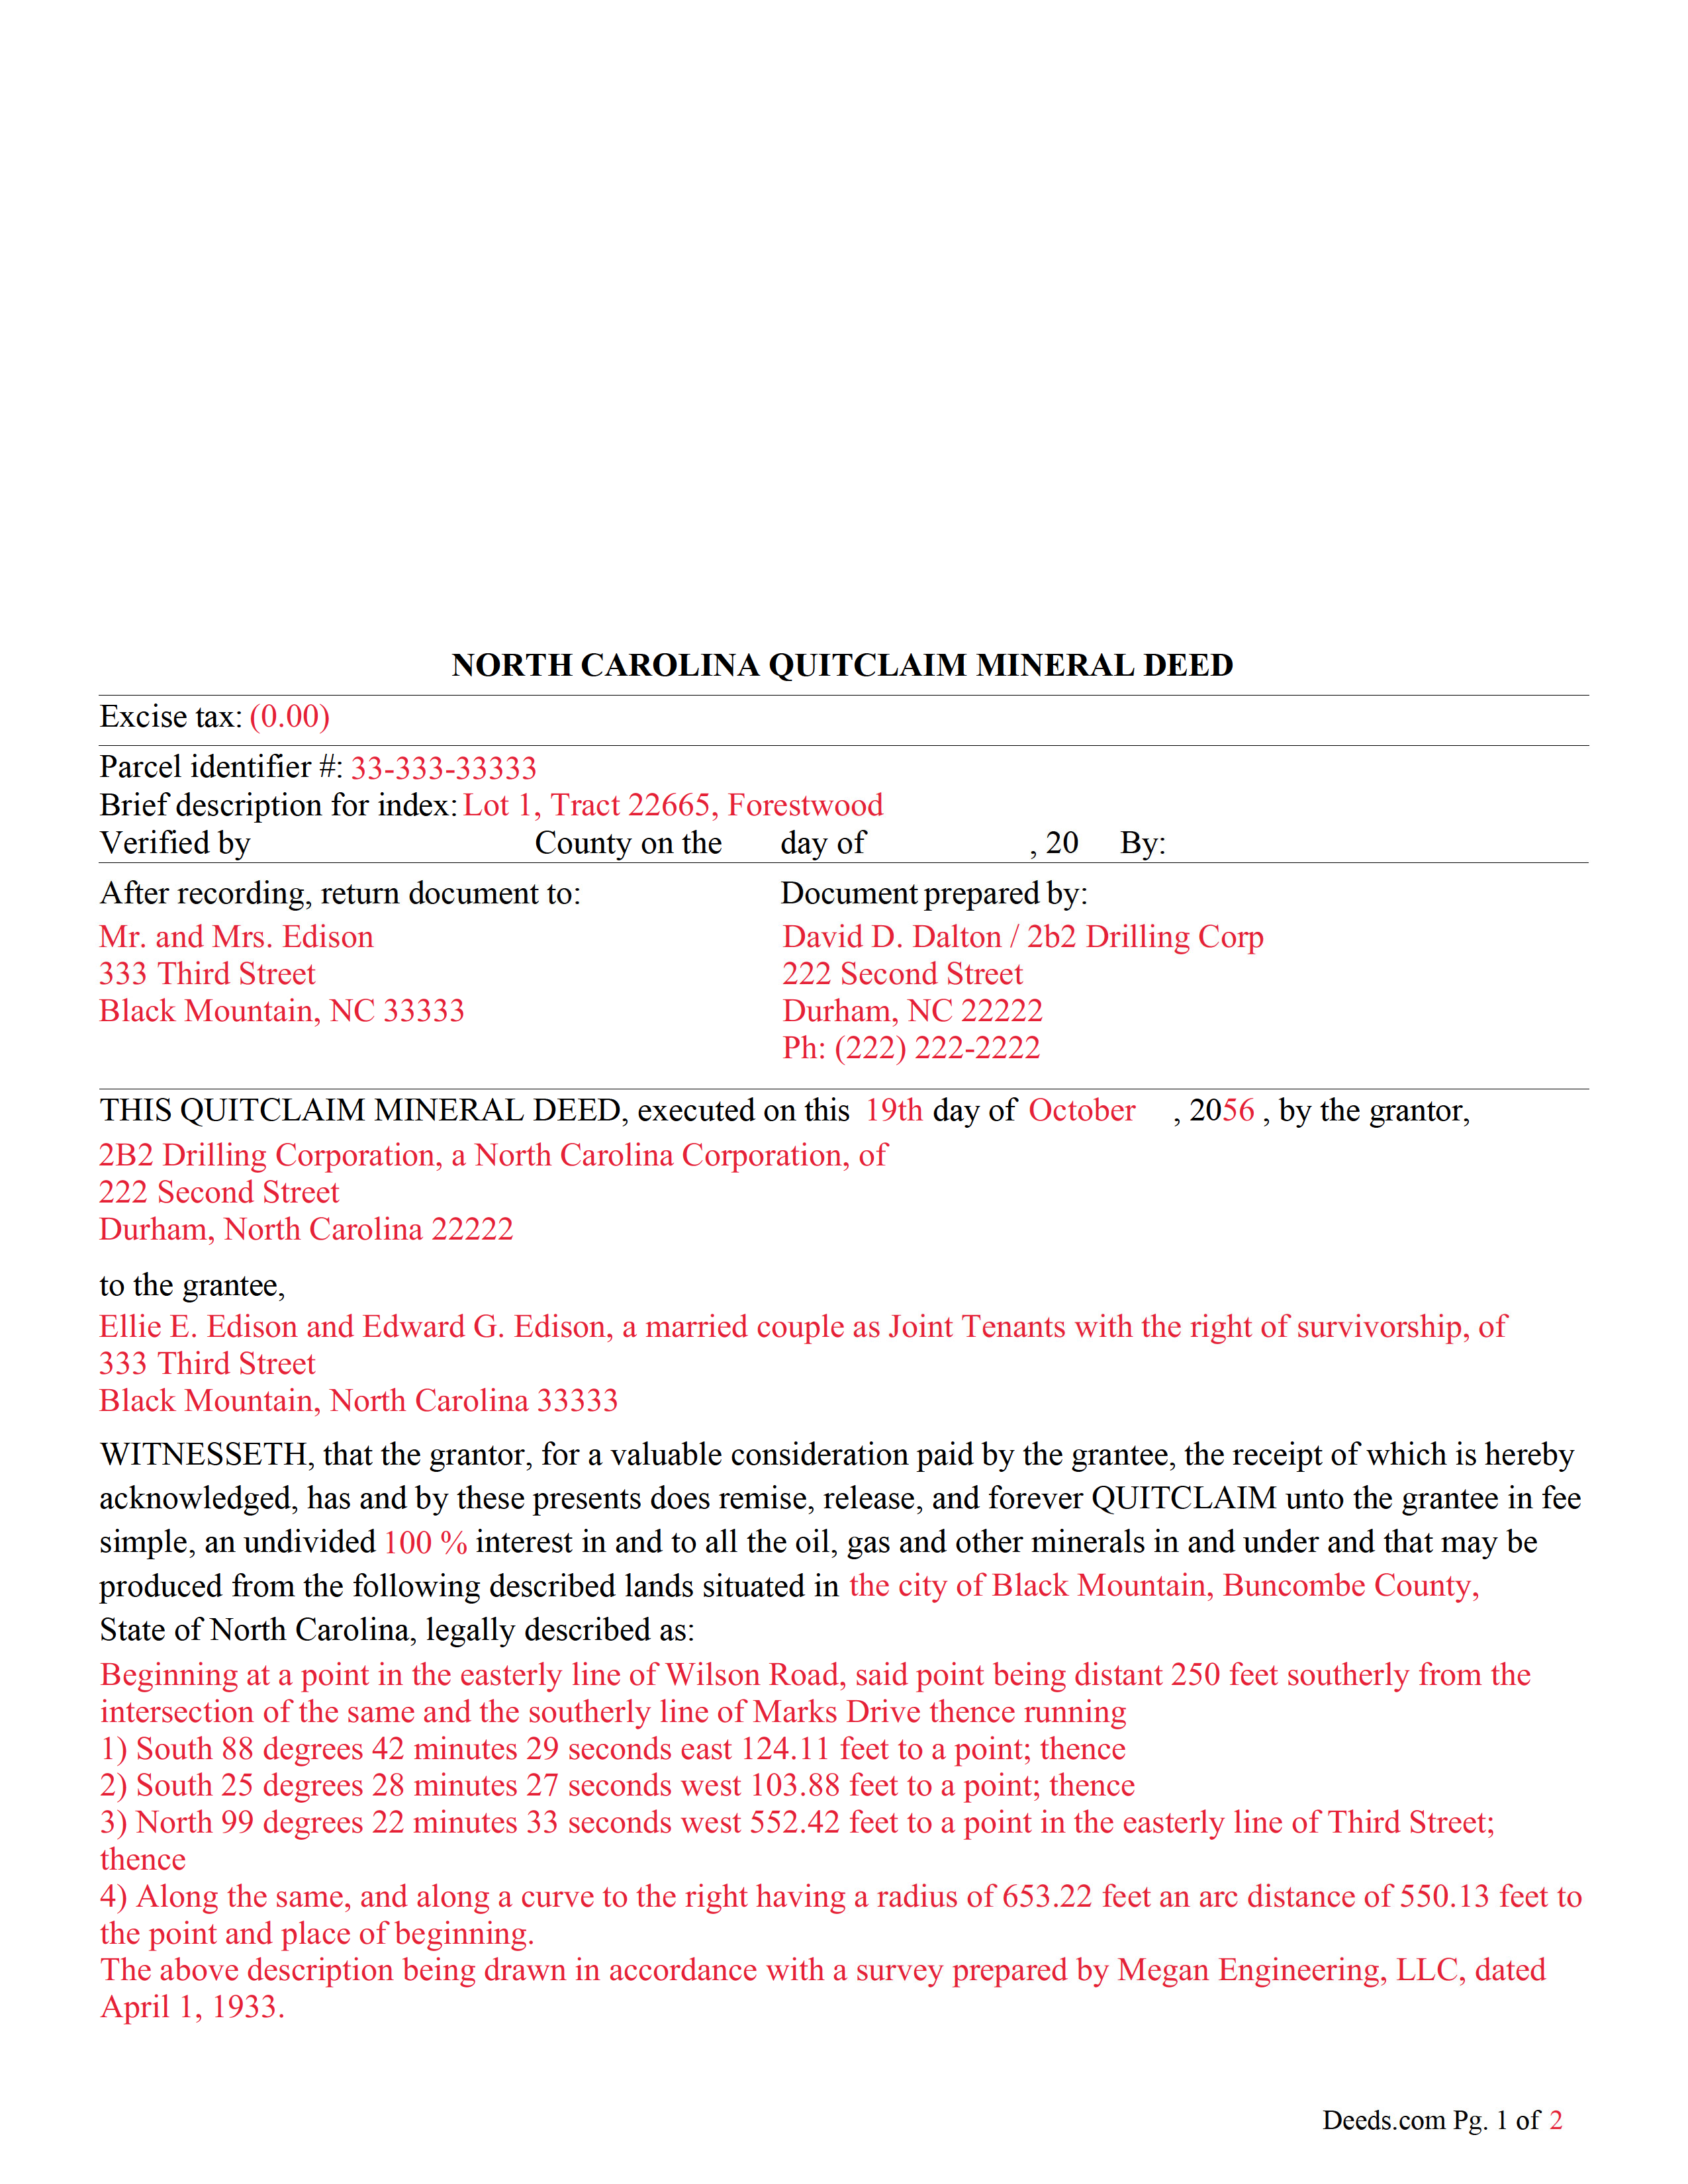 Completed Example of the Quitclaim Mineral Deed Document